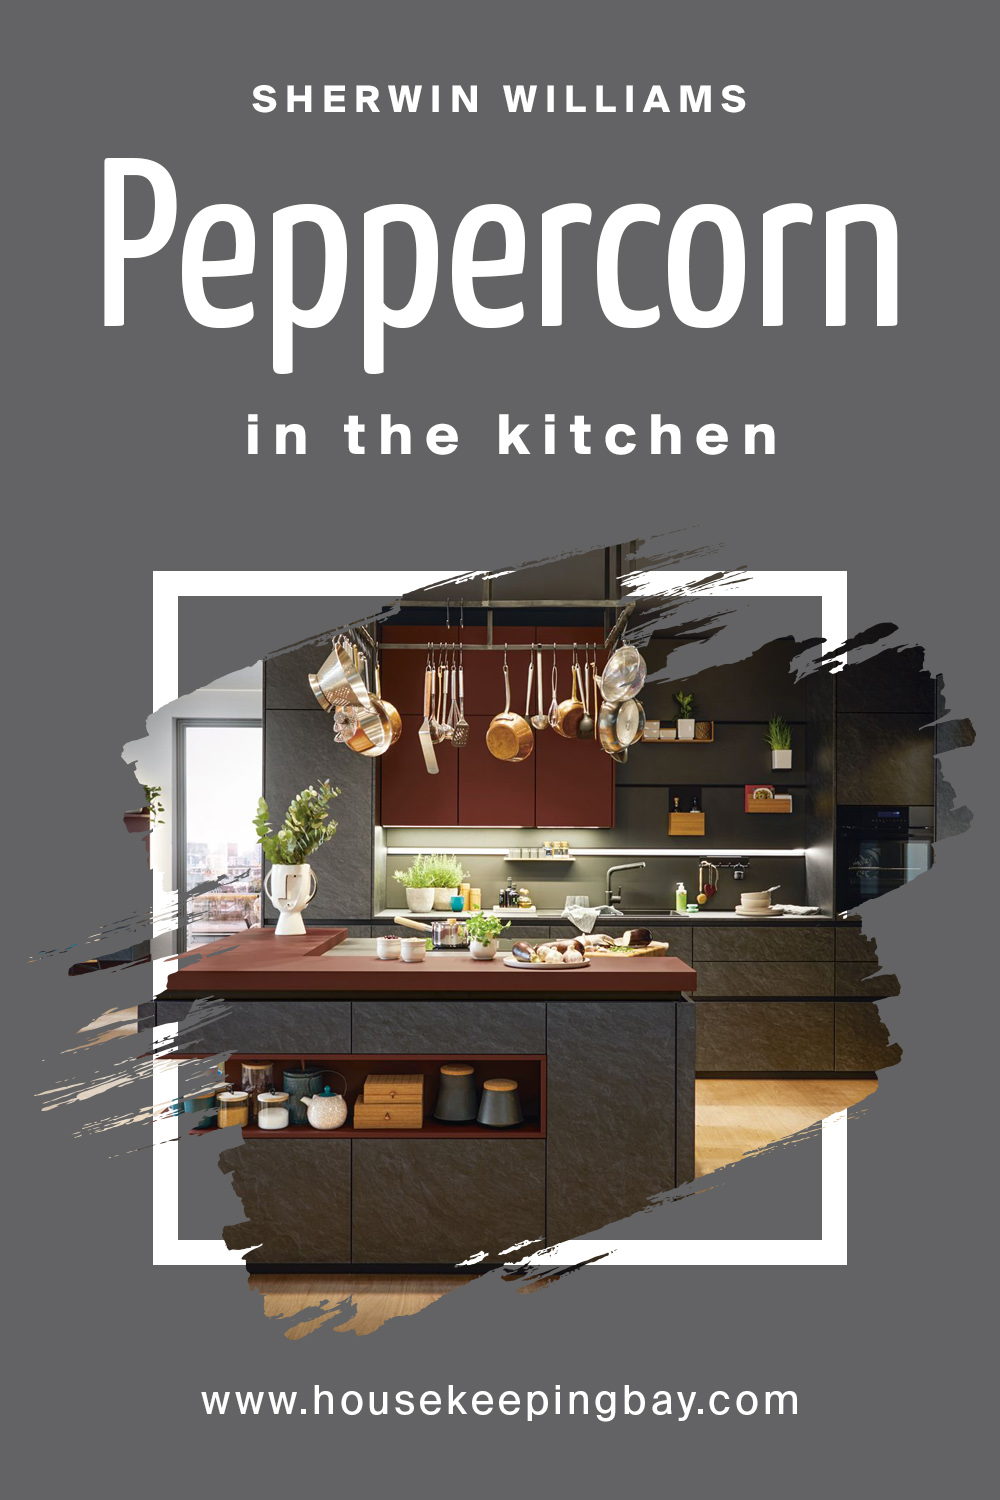 peppercorn by sherwin williams in the kitchen